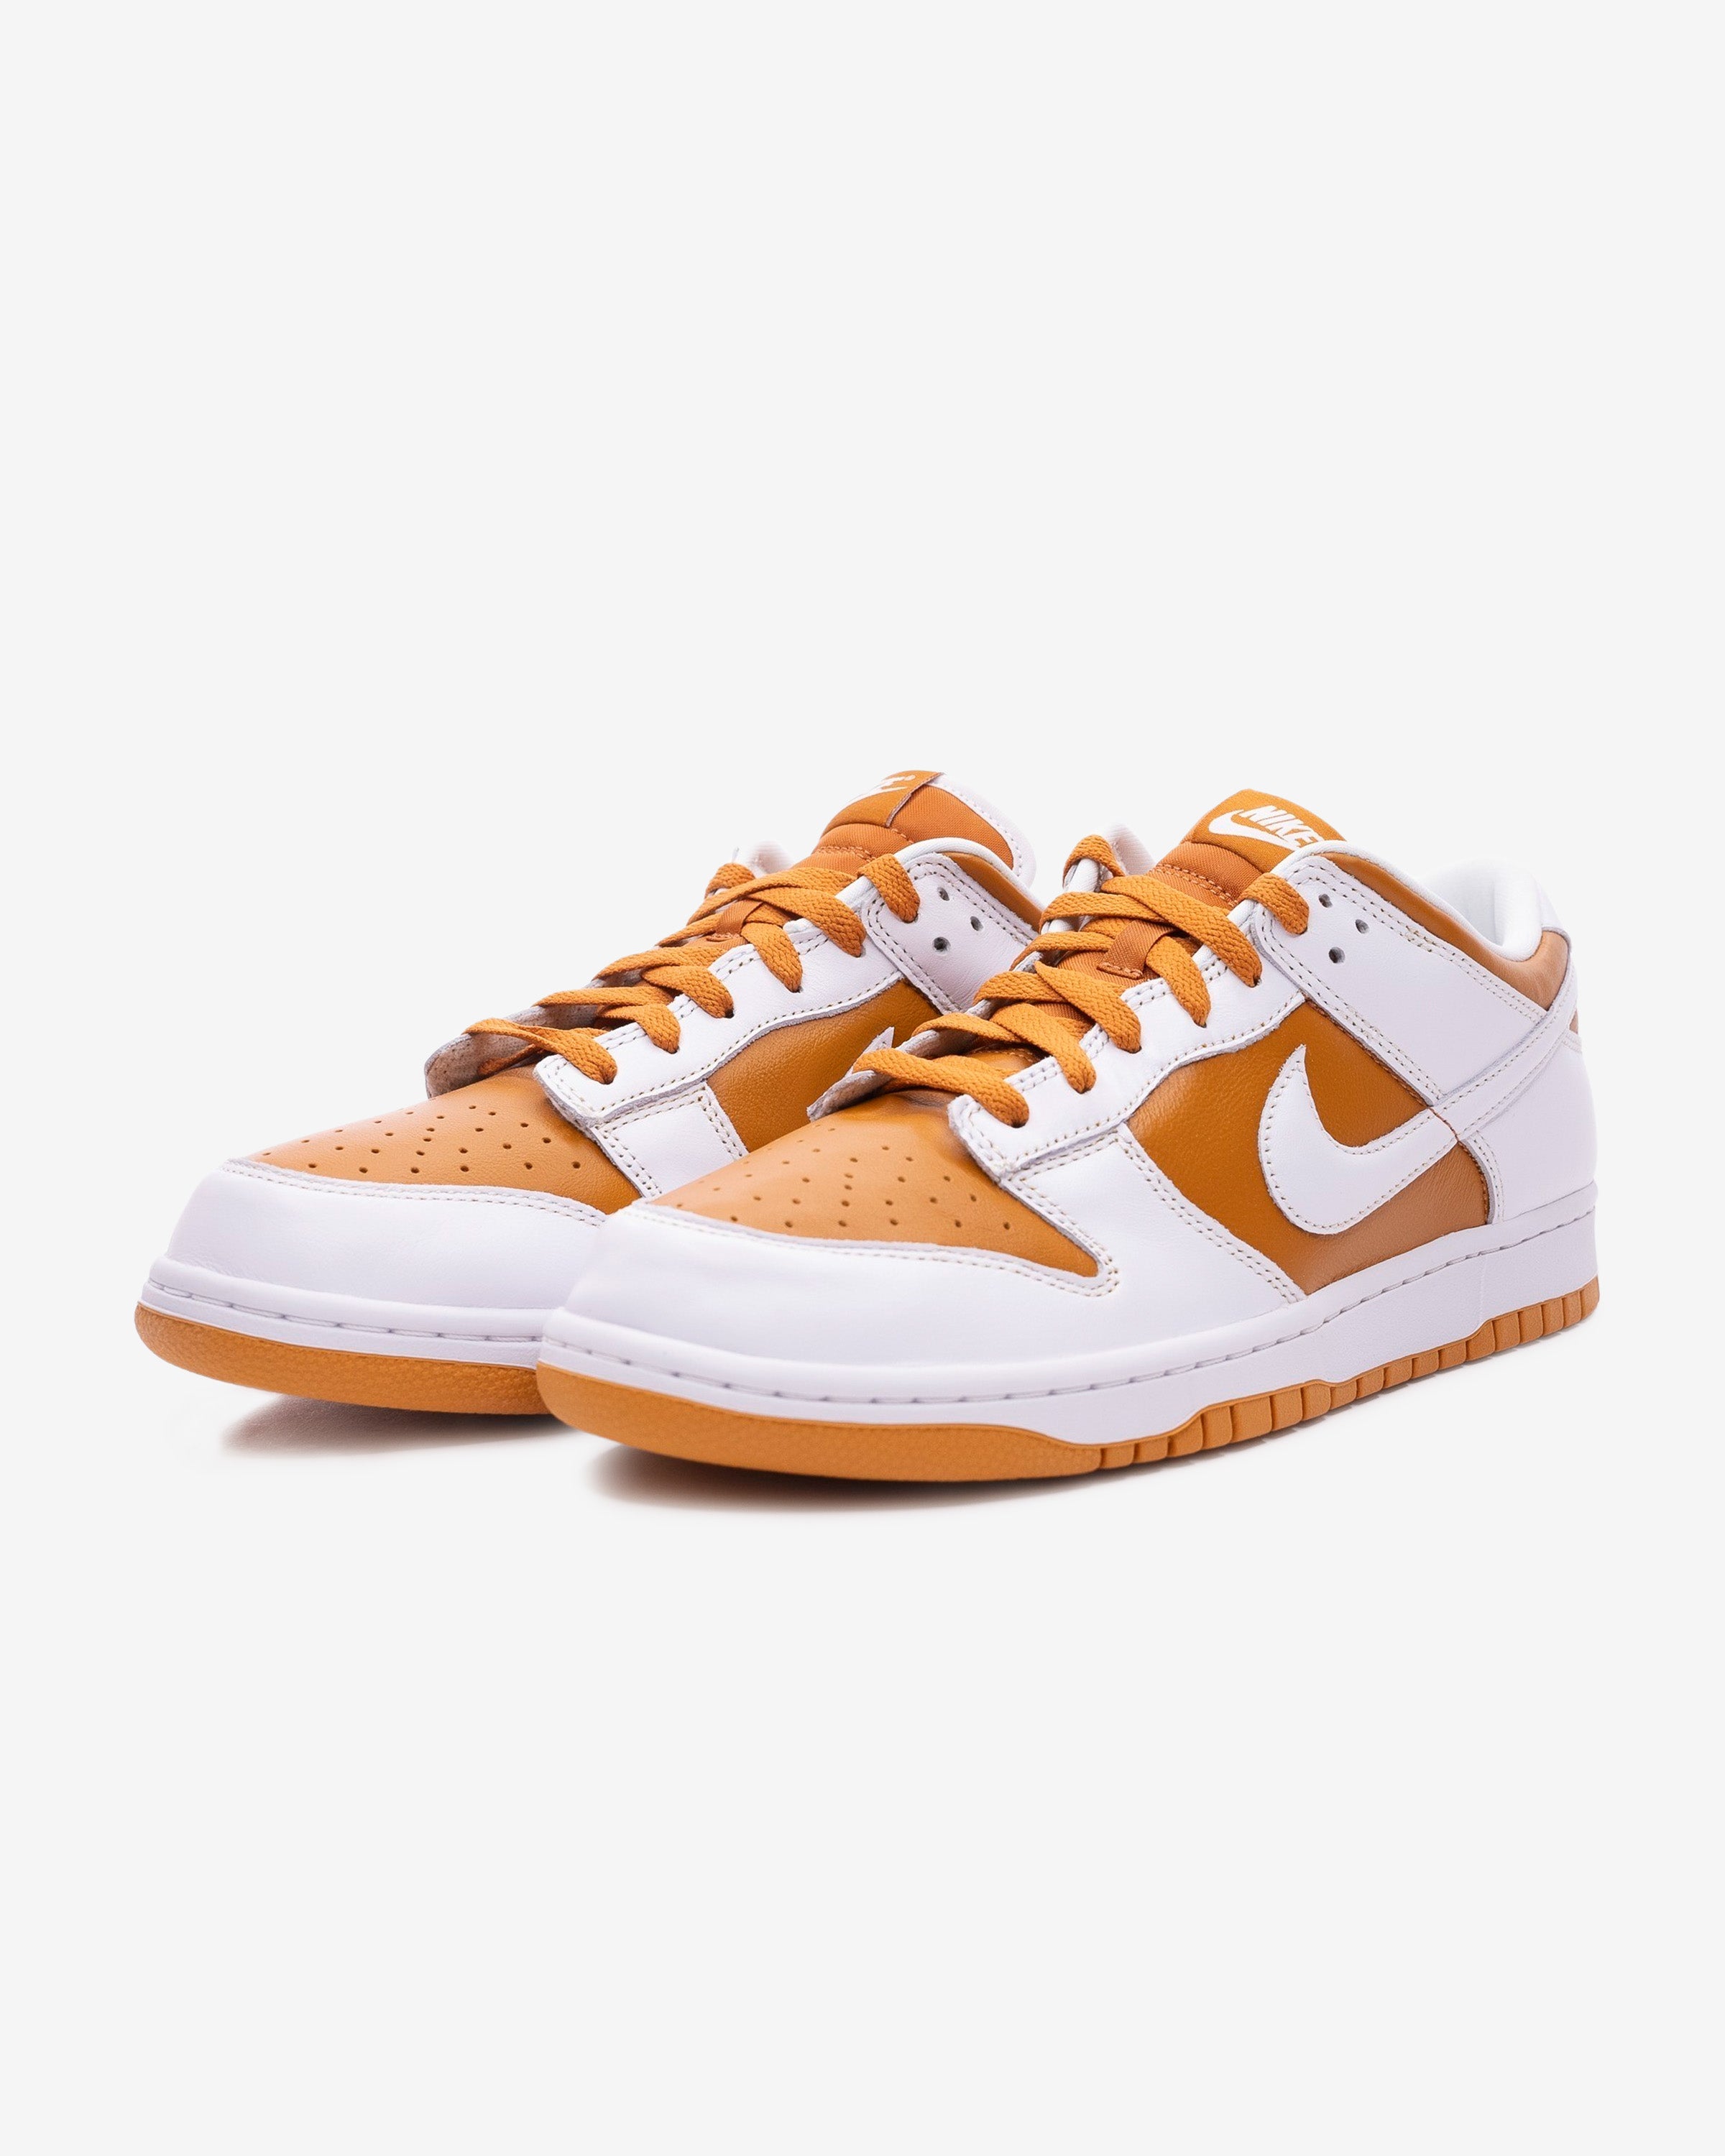 NIKE DUNK LOW undefeated購入　新品未使用 26.5㎝